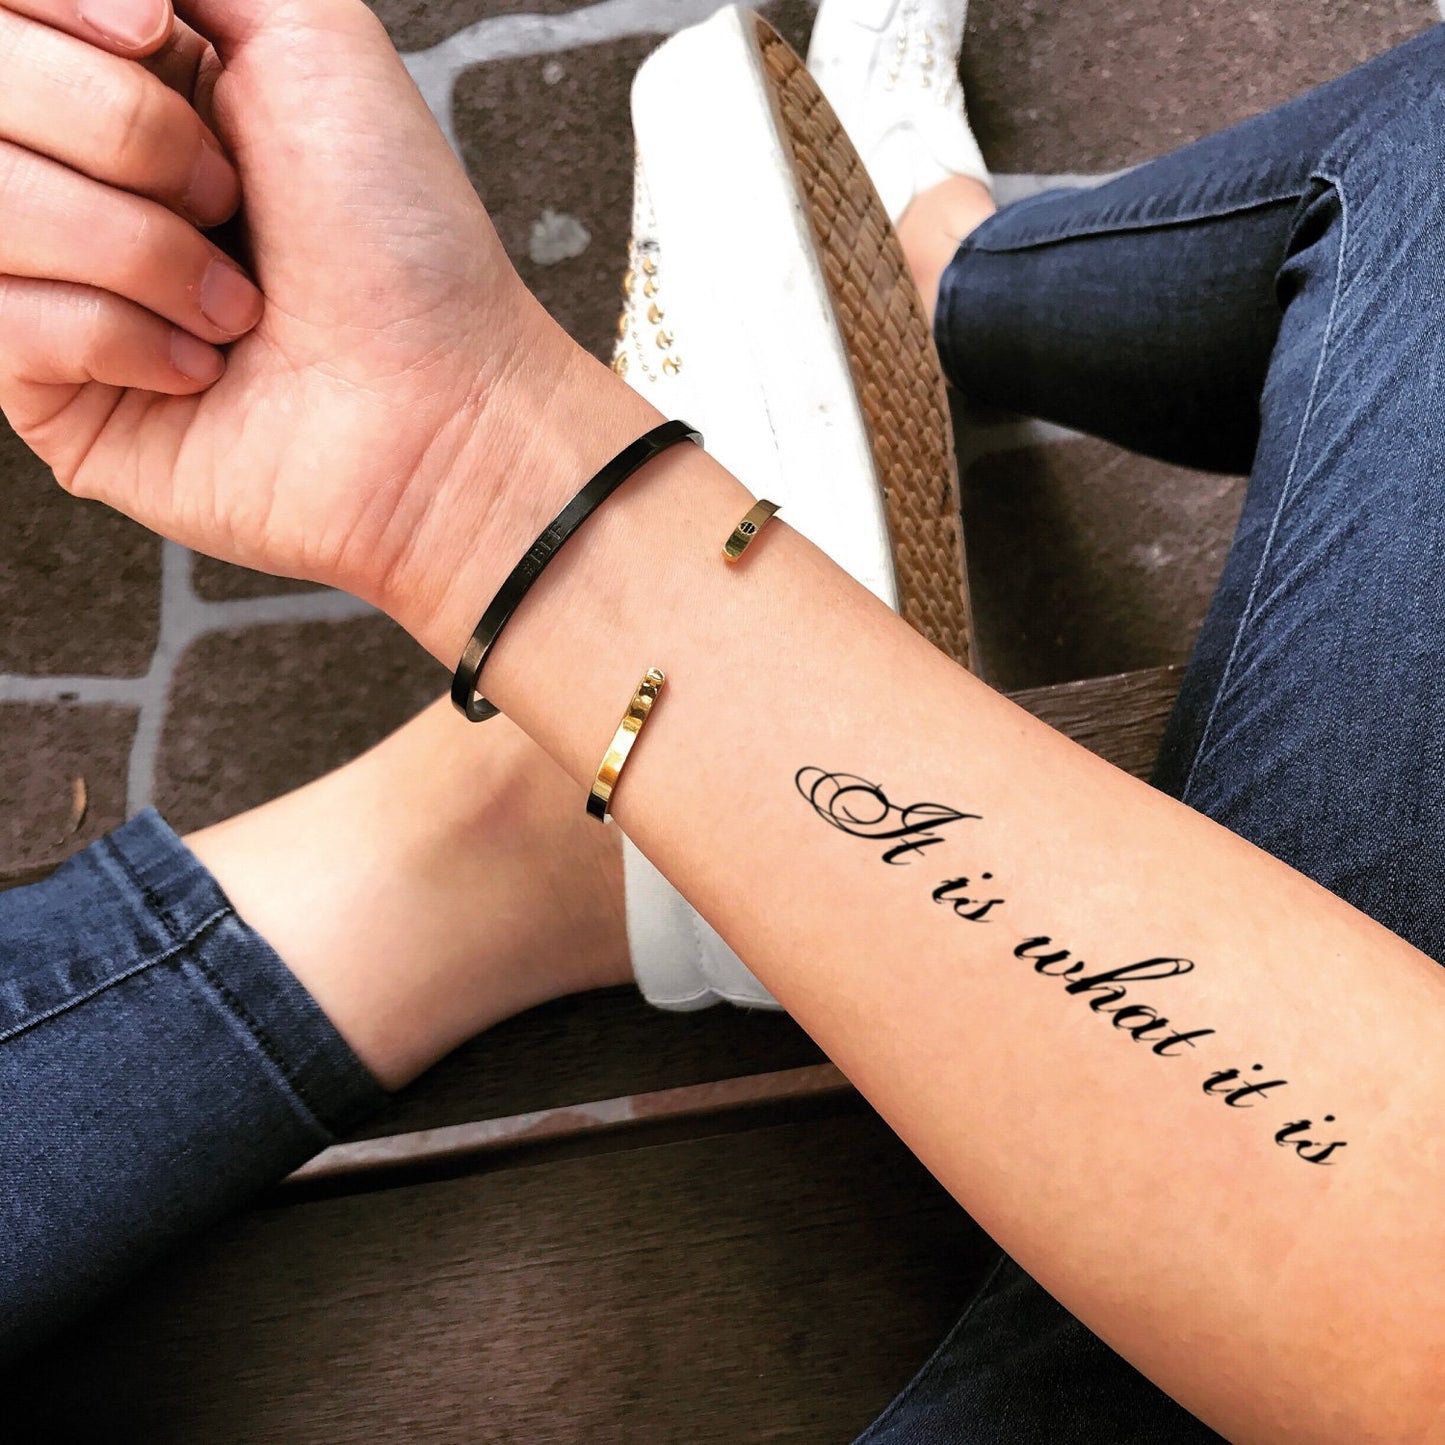 fake medium it is what it is lettering temporary tattoo sticker design idea on forearm